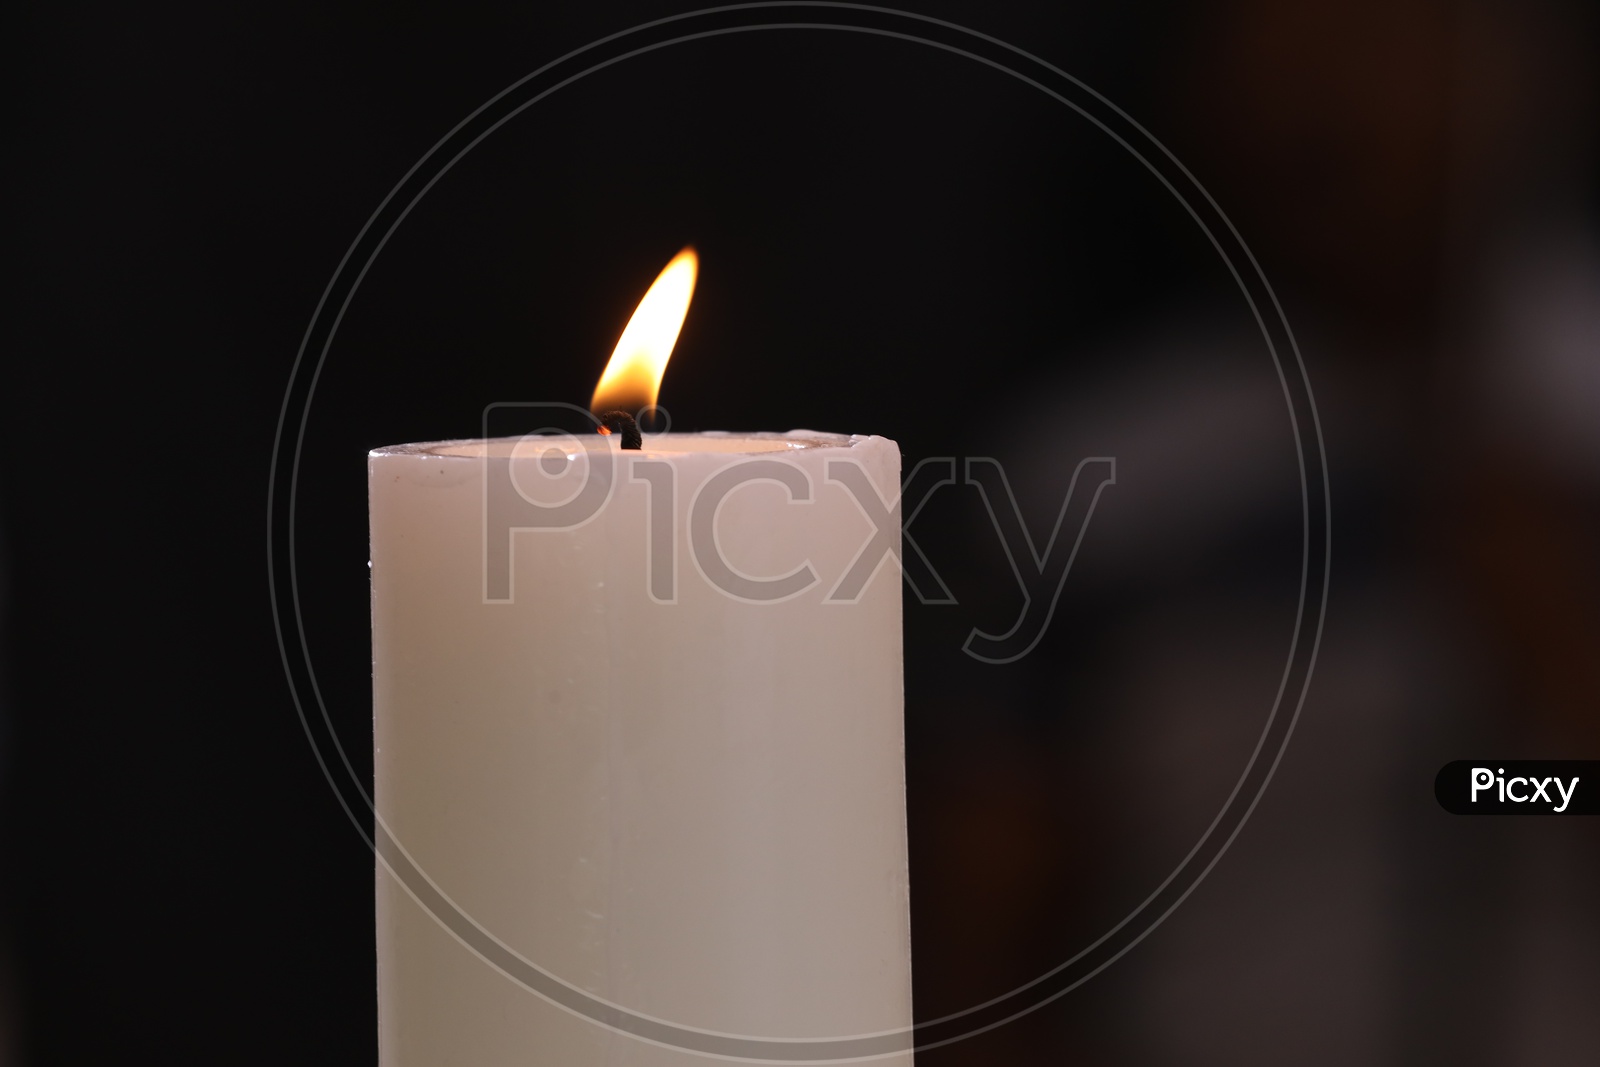 Lit Candle On an Isolated Black Background